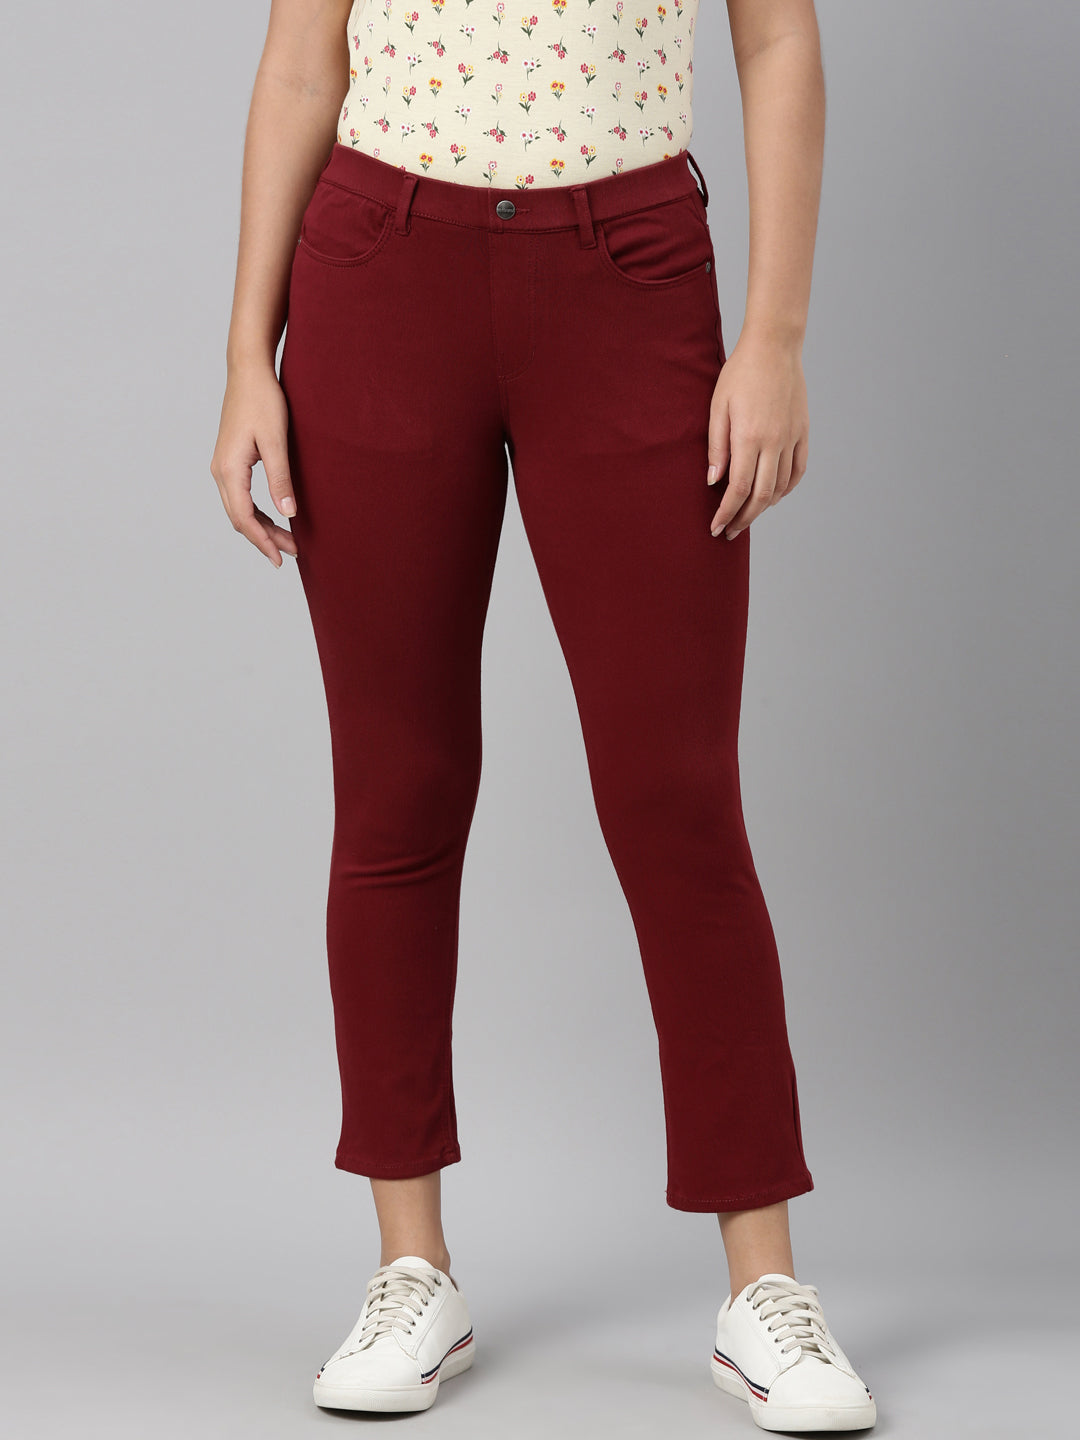 Buy GO COLORS Red Womens Solid Mid Rise Jeggings